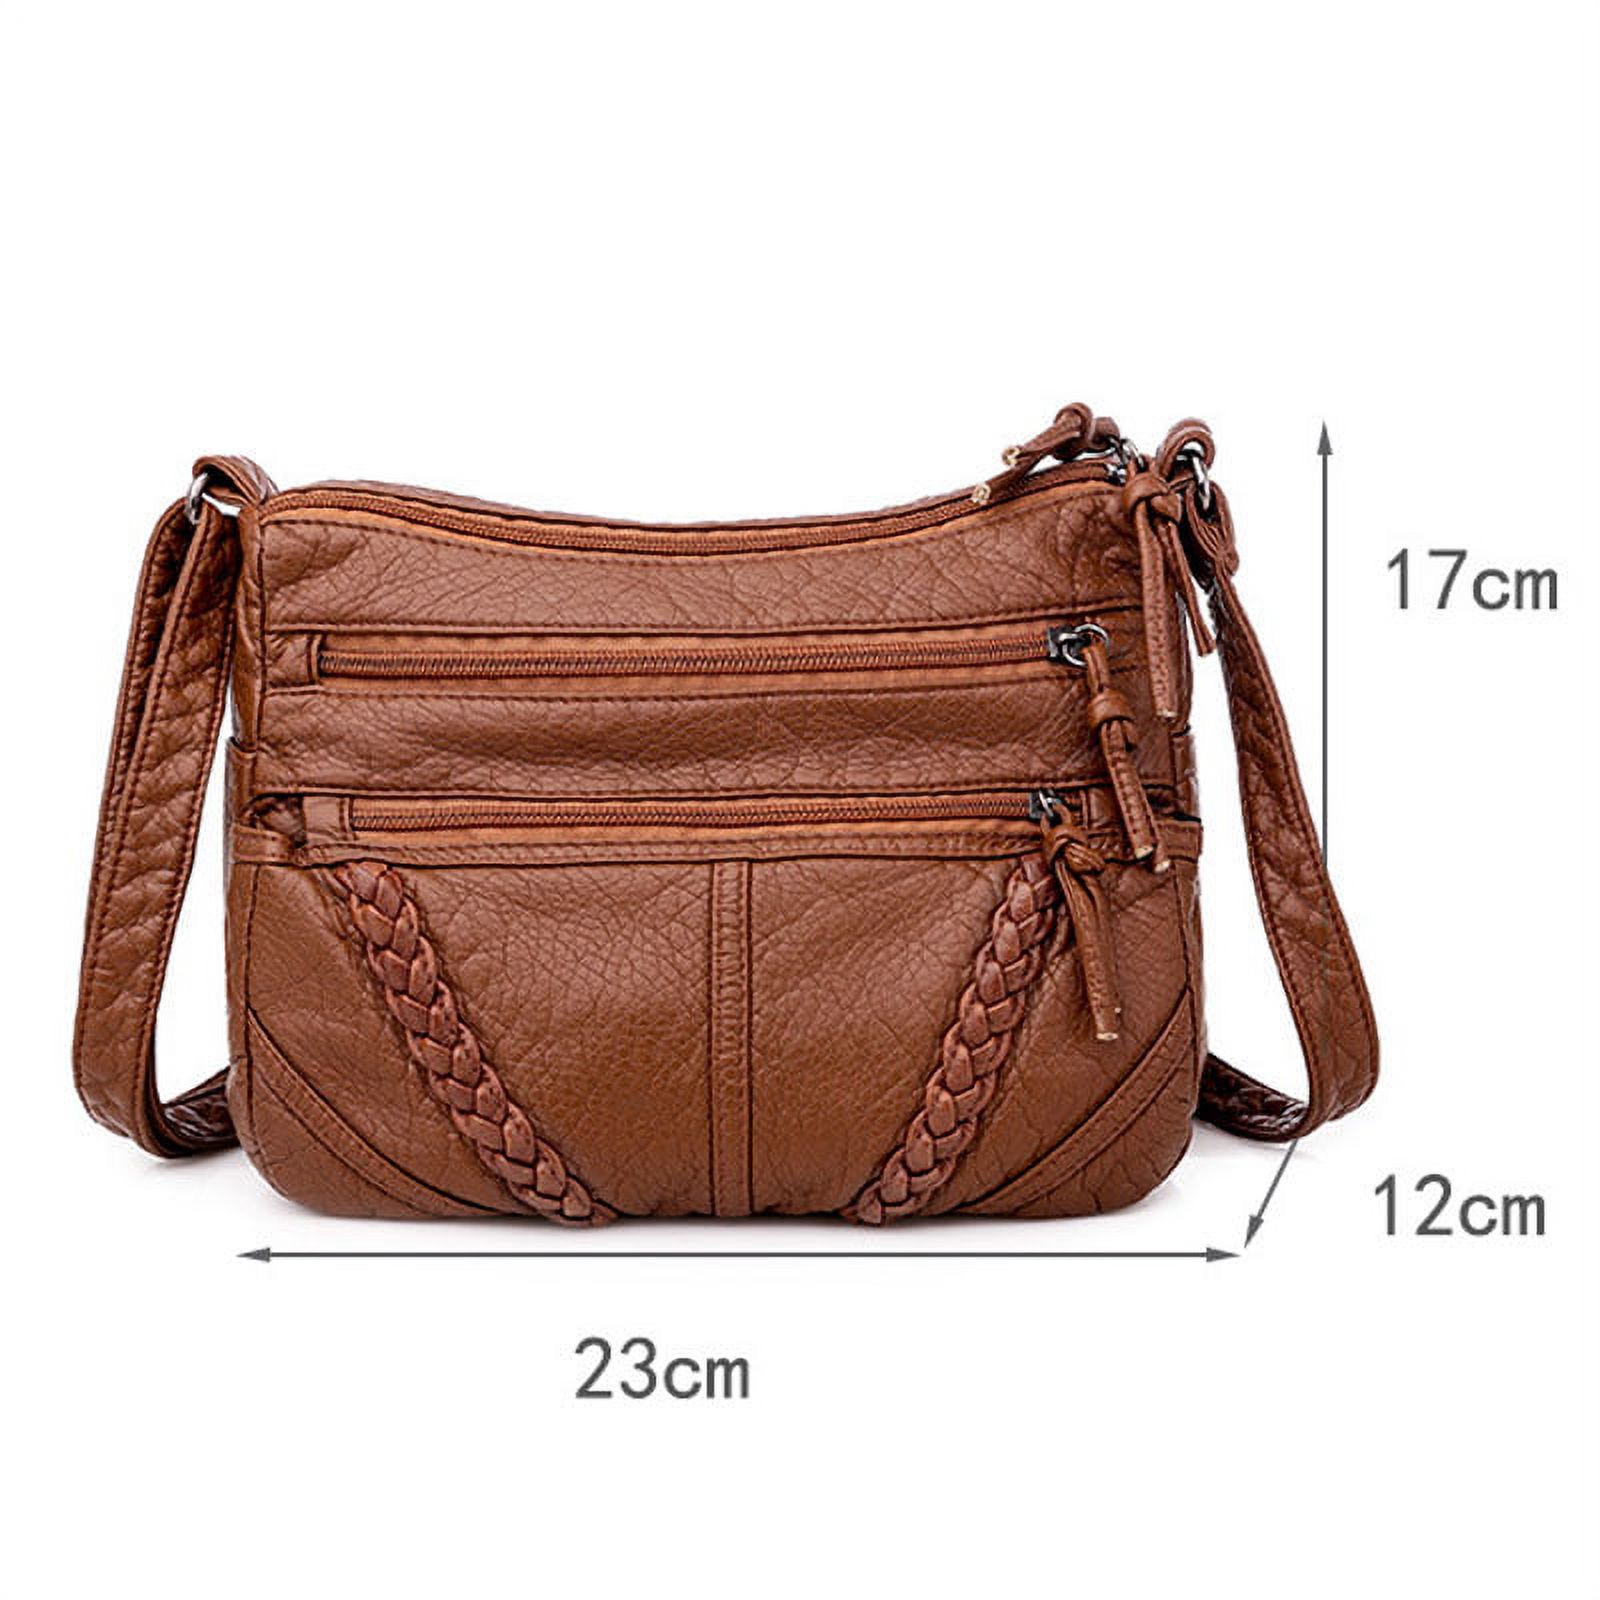 Ablanczoom Women's Soft Leather Shoulder Bags Classic Casual Crossbody Bag For Female - image 2 of 6